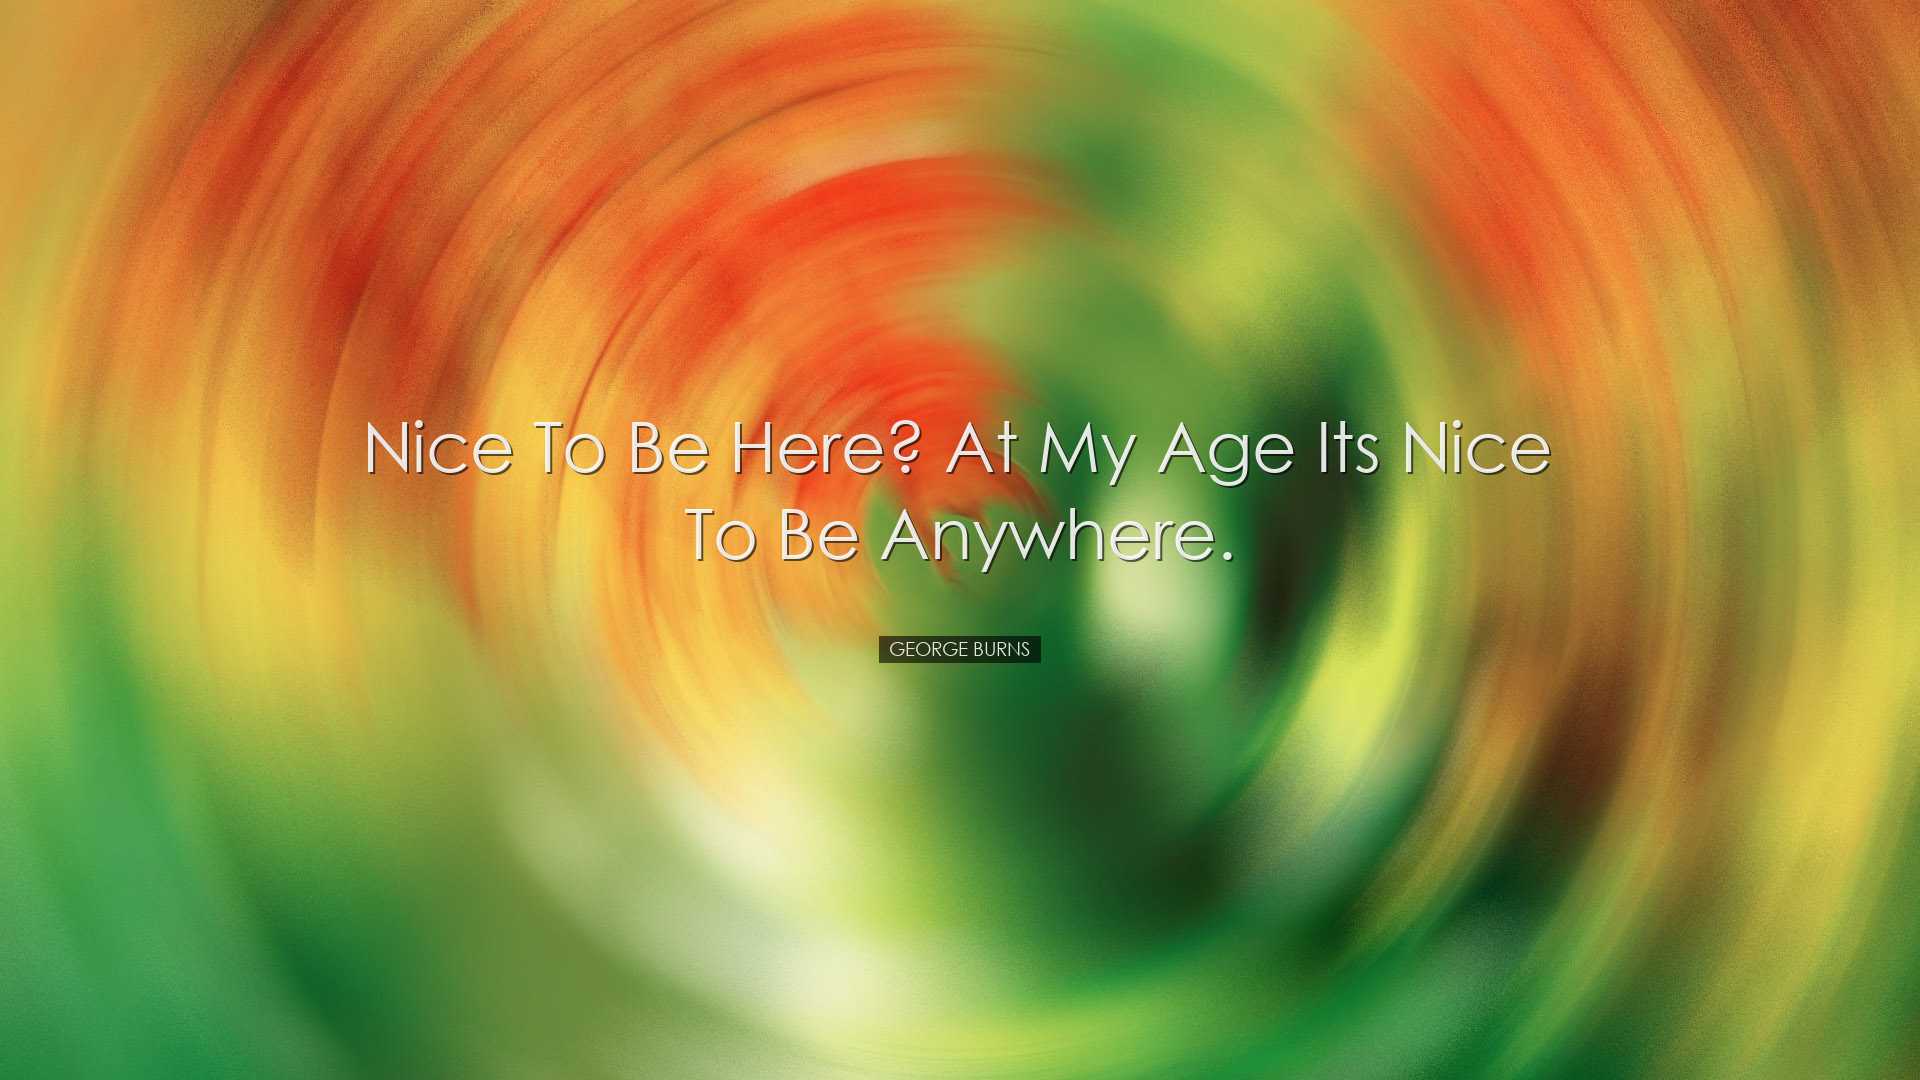 Nice to be here? At my age its nice to be anywhere. - George Burns